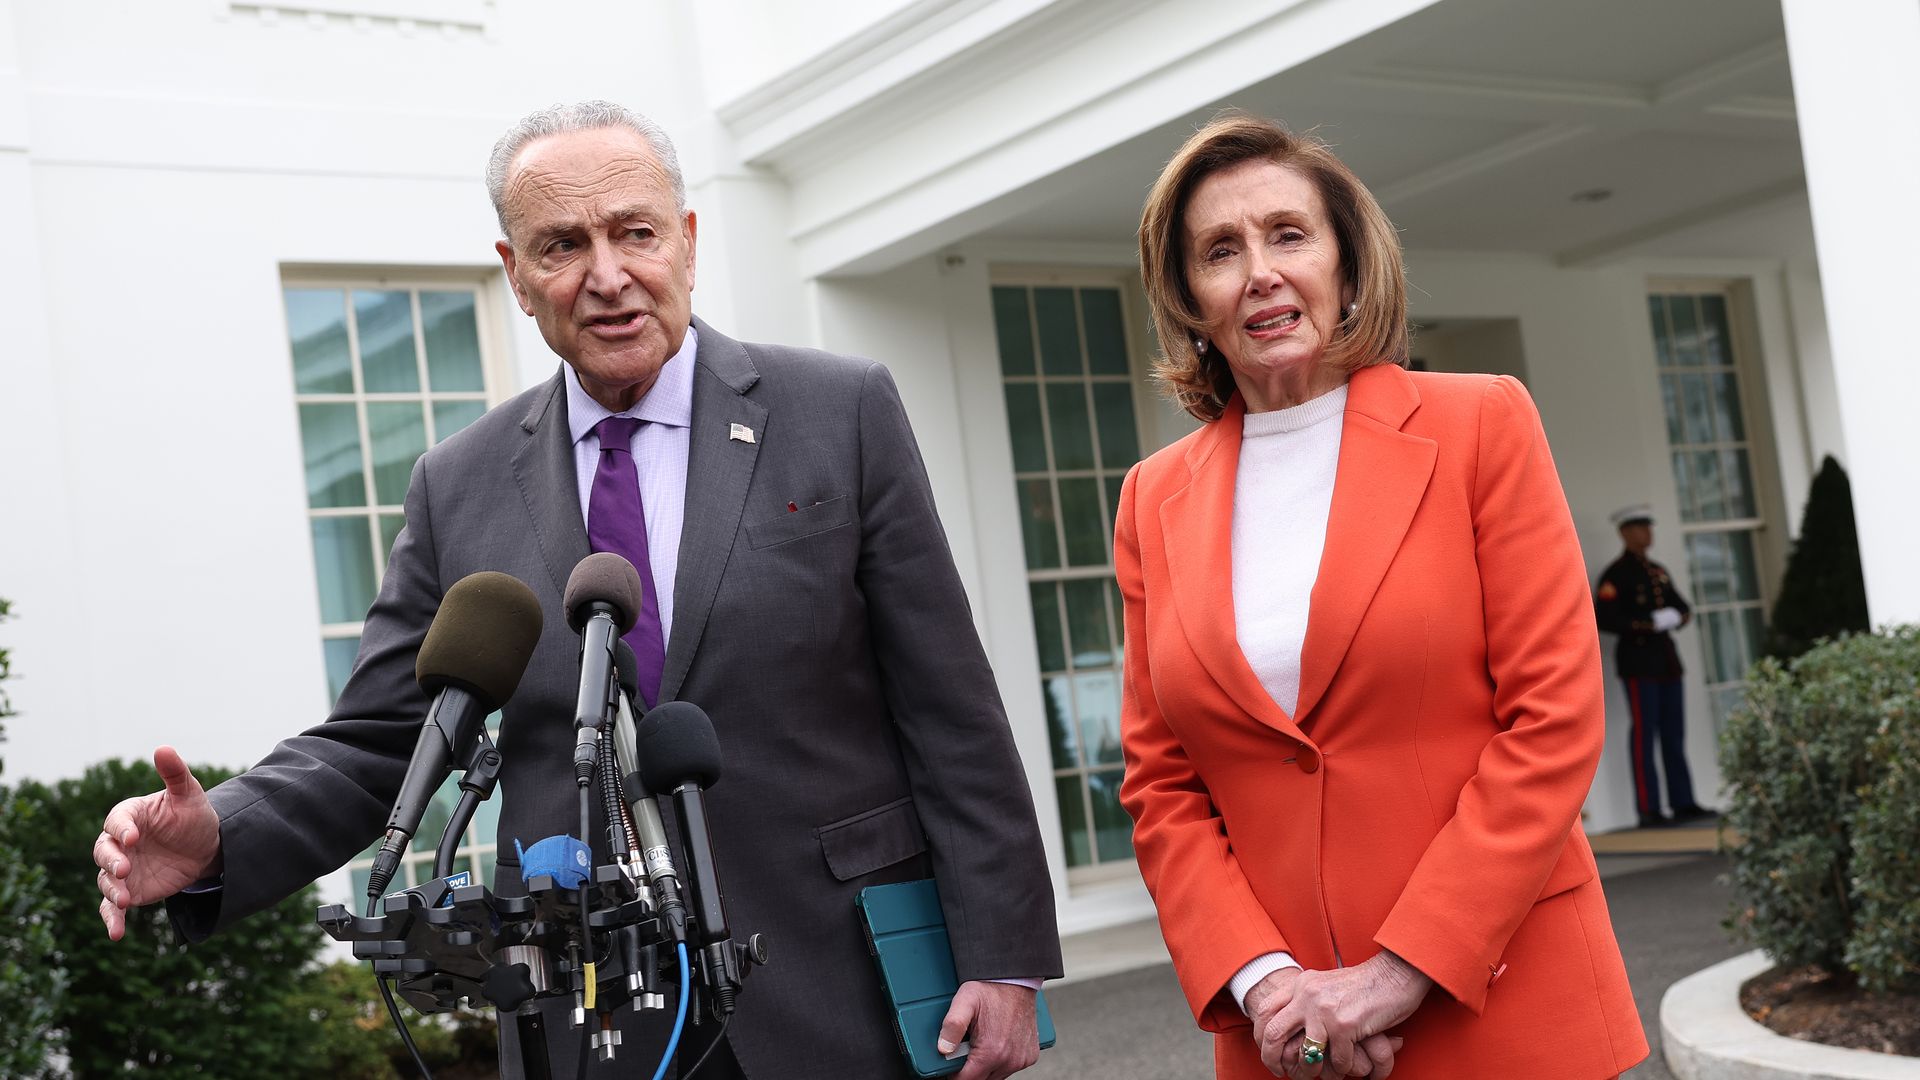 Senate Majority Leader Charles Schumer (D-NY) and Speaker of the House Nancy Pelosi (D-CA) speak to the media following a meeting with U.S. President Joe Biden at the White House on November 29, 2022